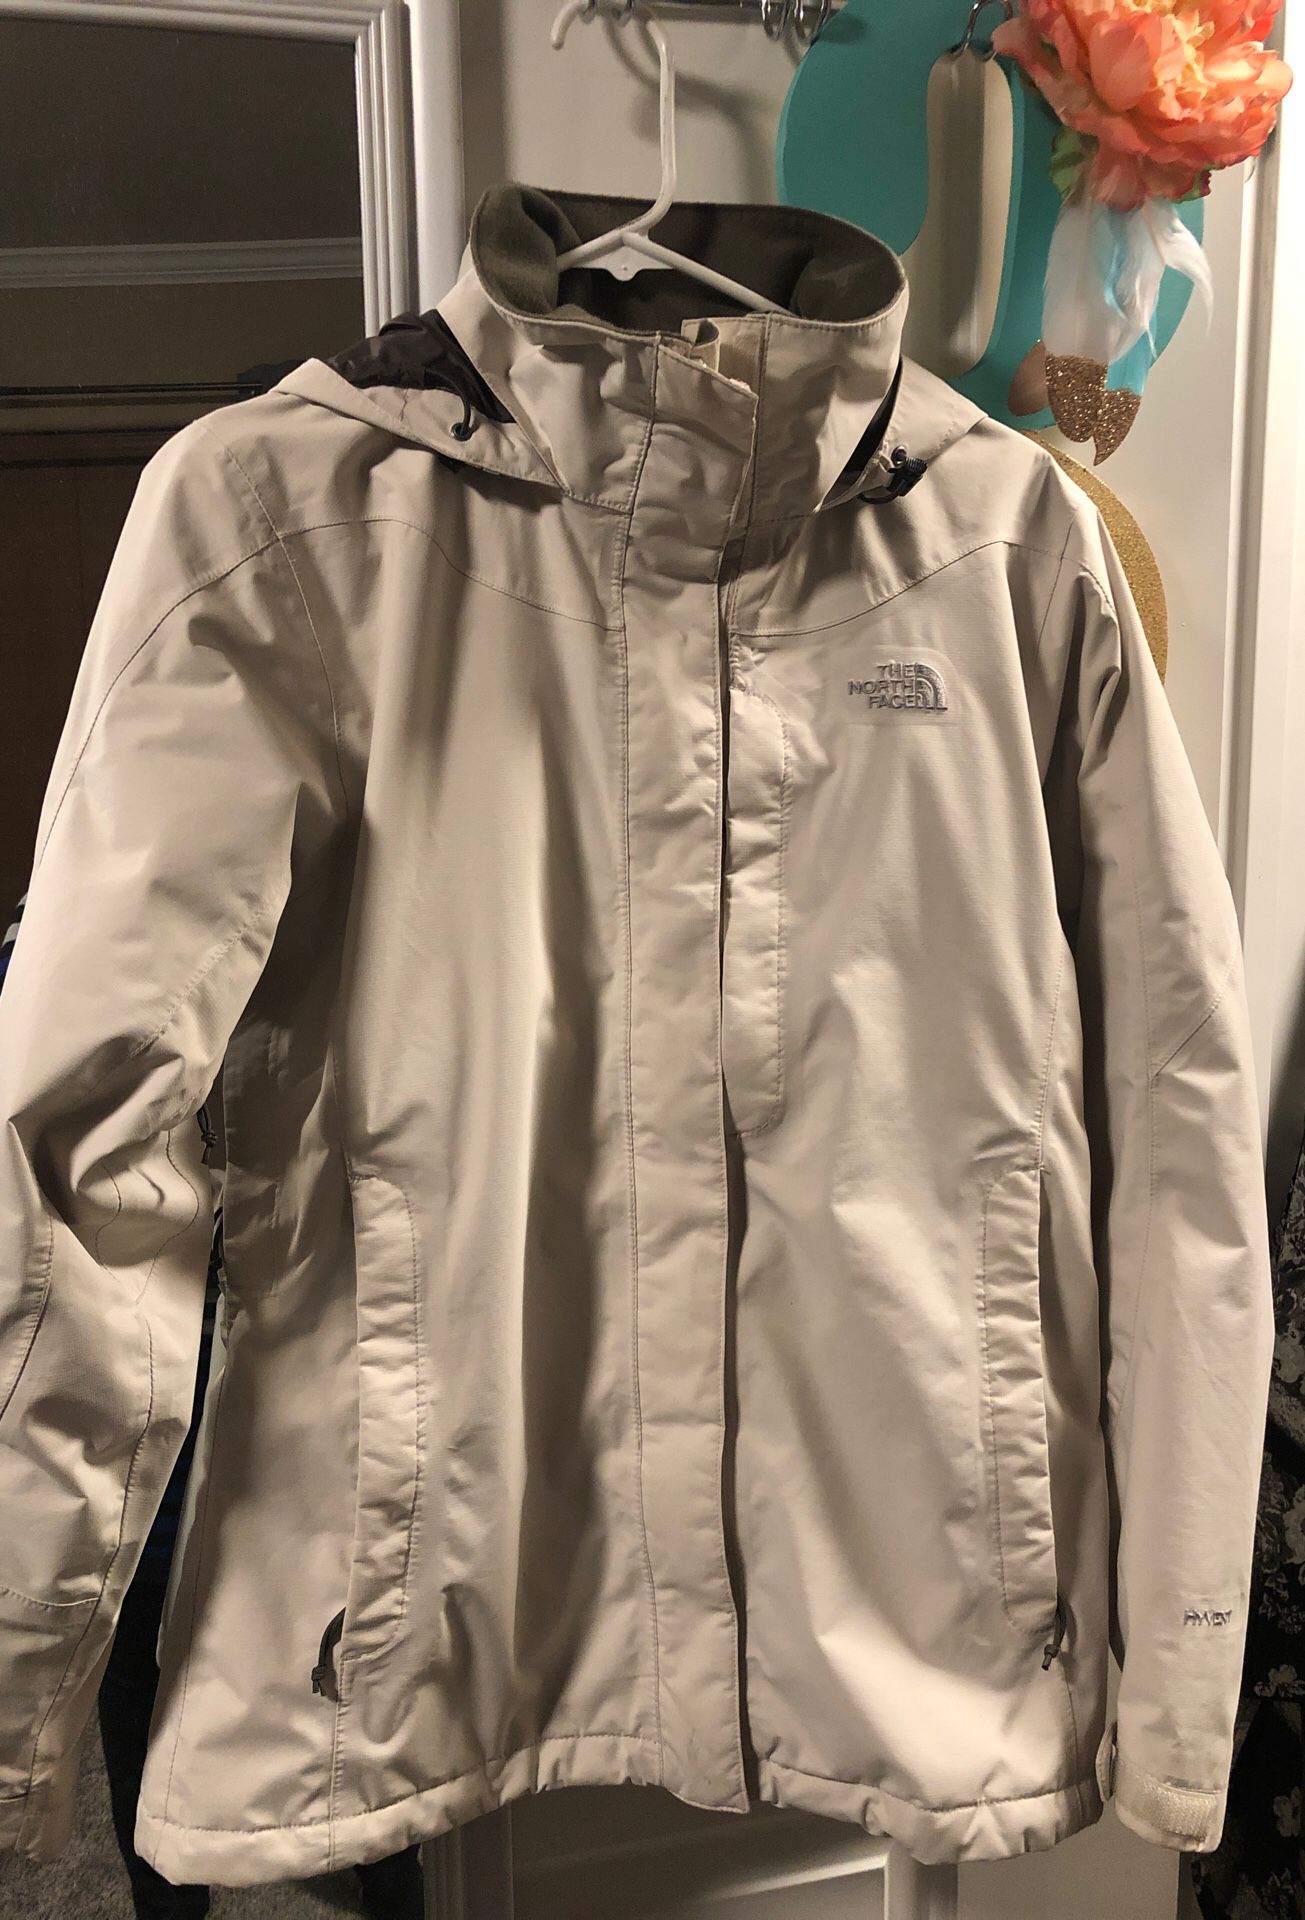 The North face woman jacket size M